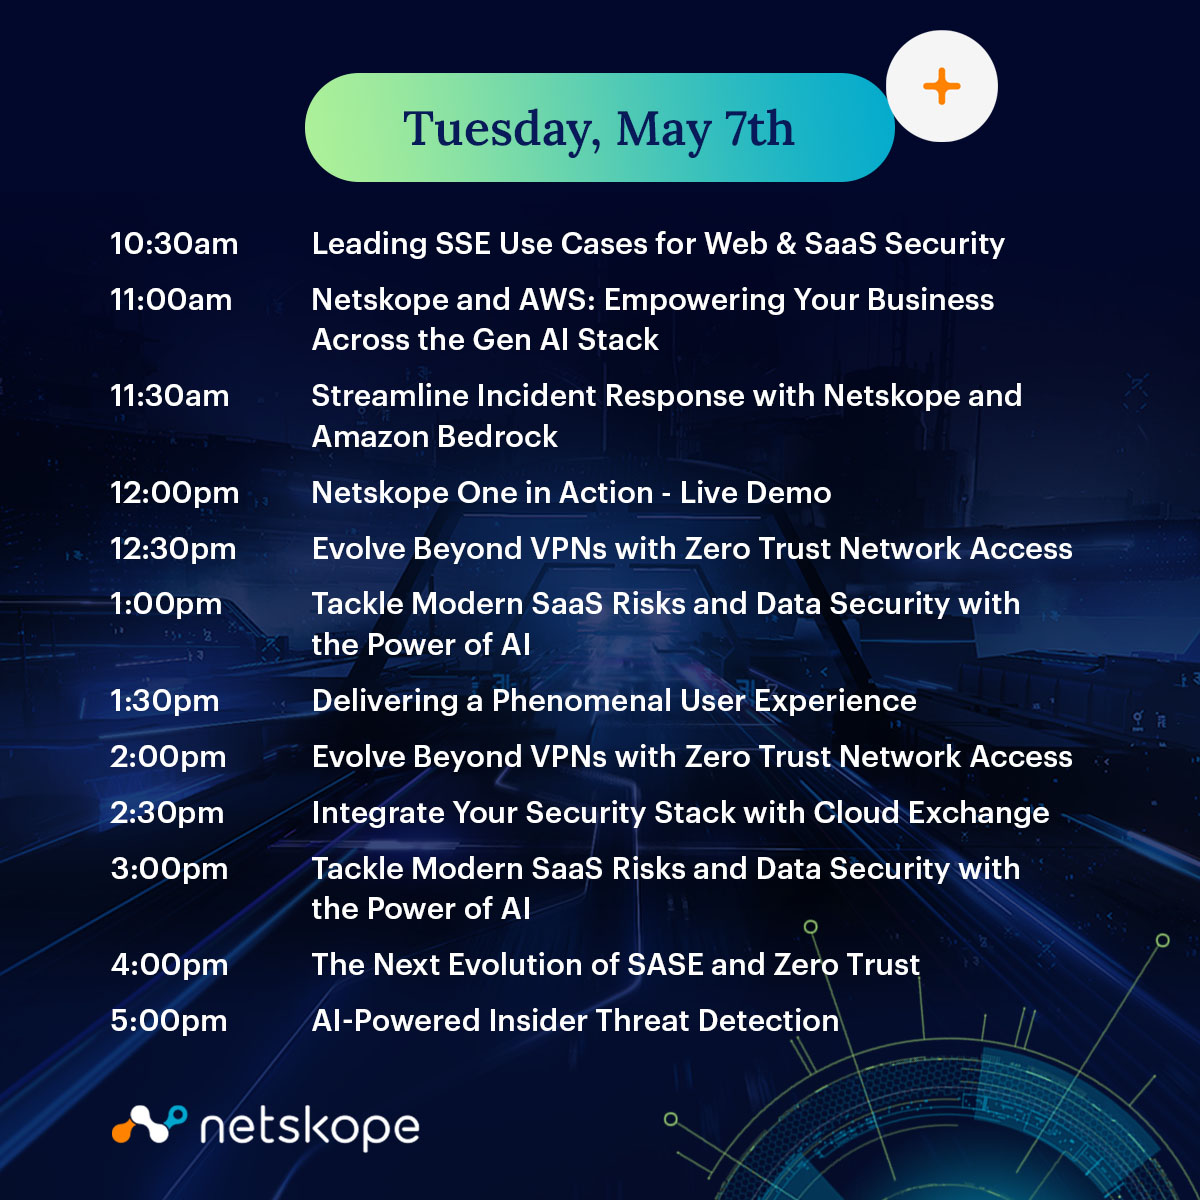 We're serving up the 🔥 hottest 🔥 topics in security all week. Come by the Netskope booth to experience the next evolution of #SASE and #ZeroTrust. 💪 Pro tip: Bookmark this post for easy access to the schedule throughout the day.